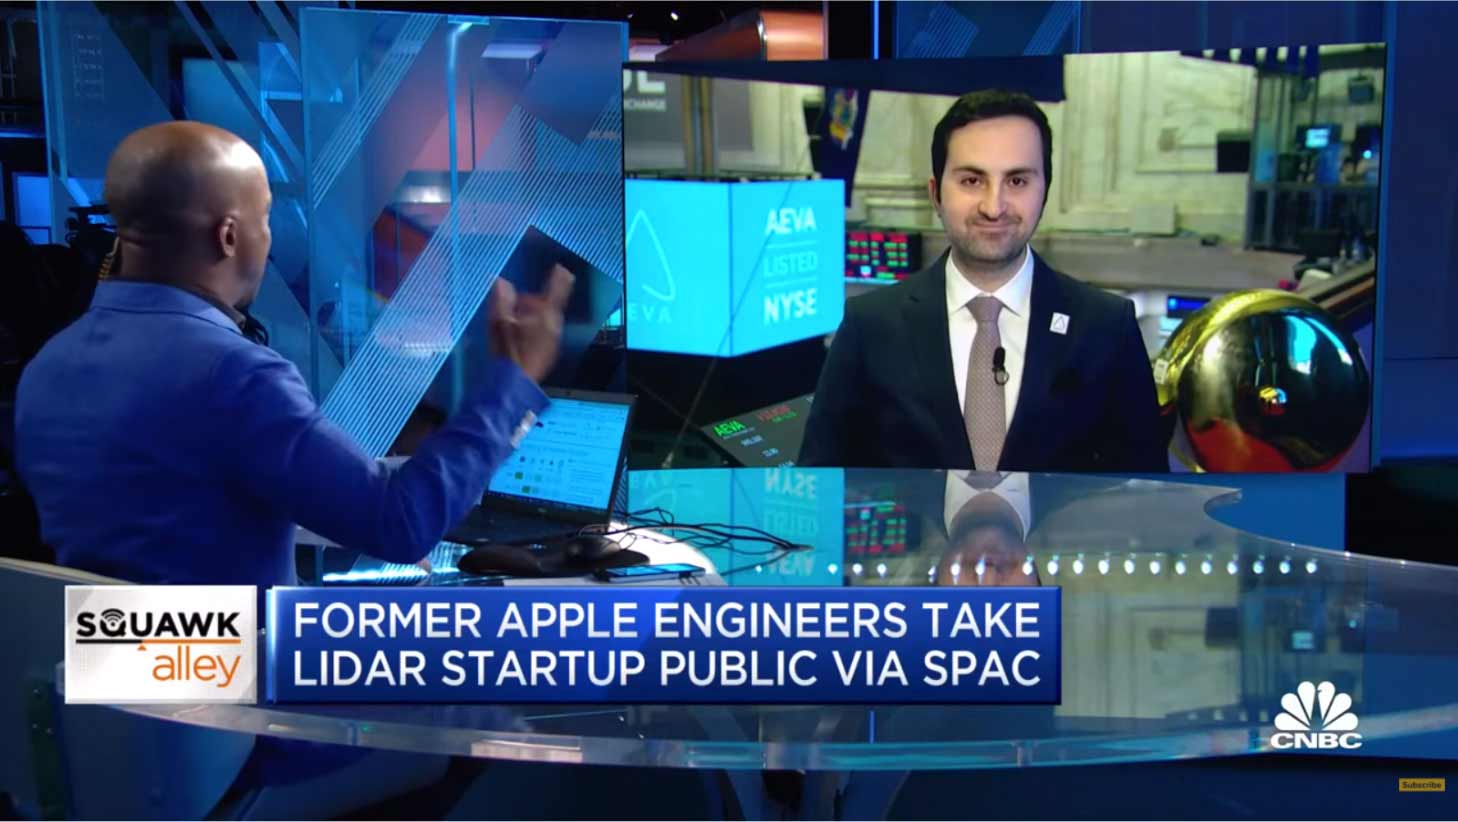 a screenshot of a tv appearance by the AEVA CEO on Squawk alley on CNBC